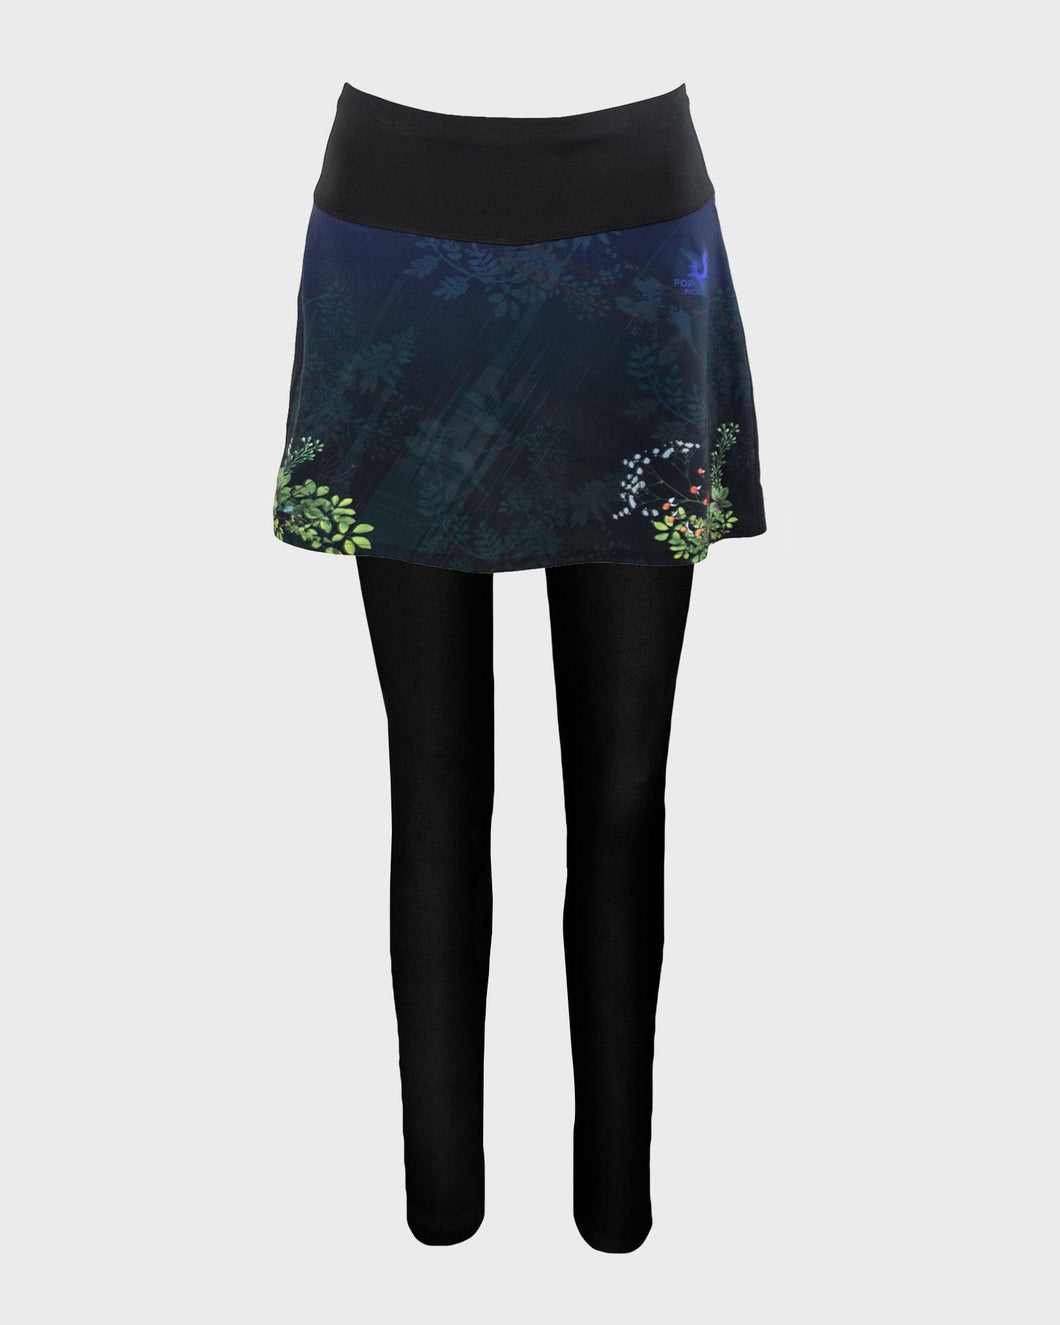 Printed running skirt with inner black leggings and pockets - MIDNIGHT - Fox-Pace